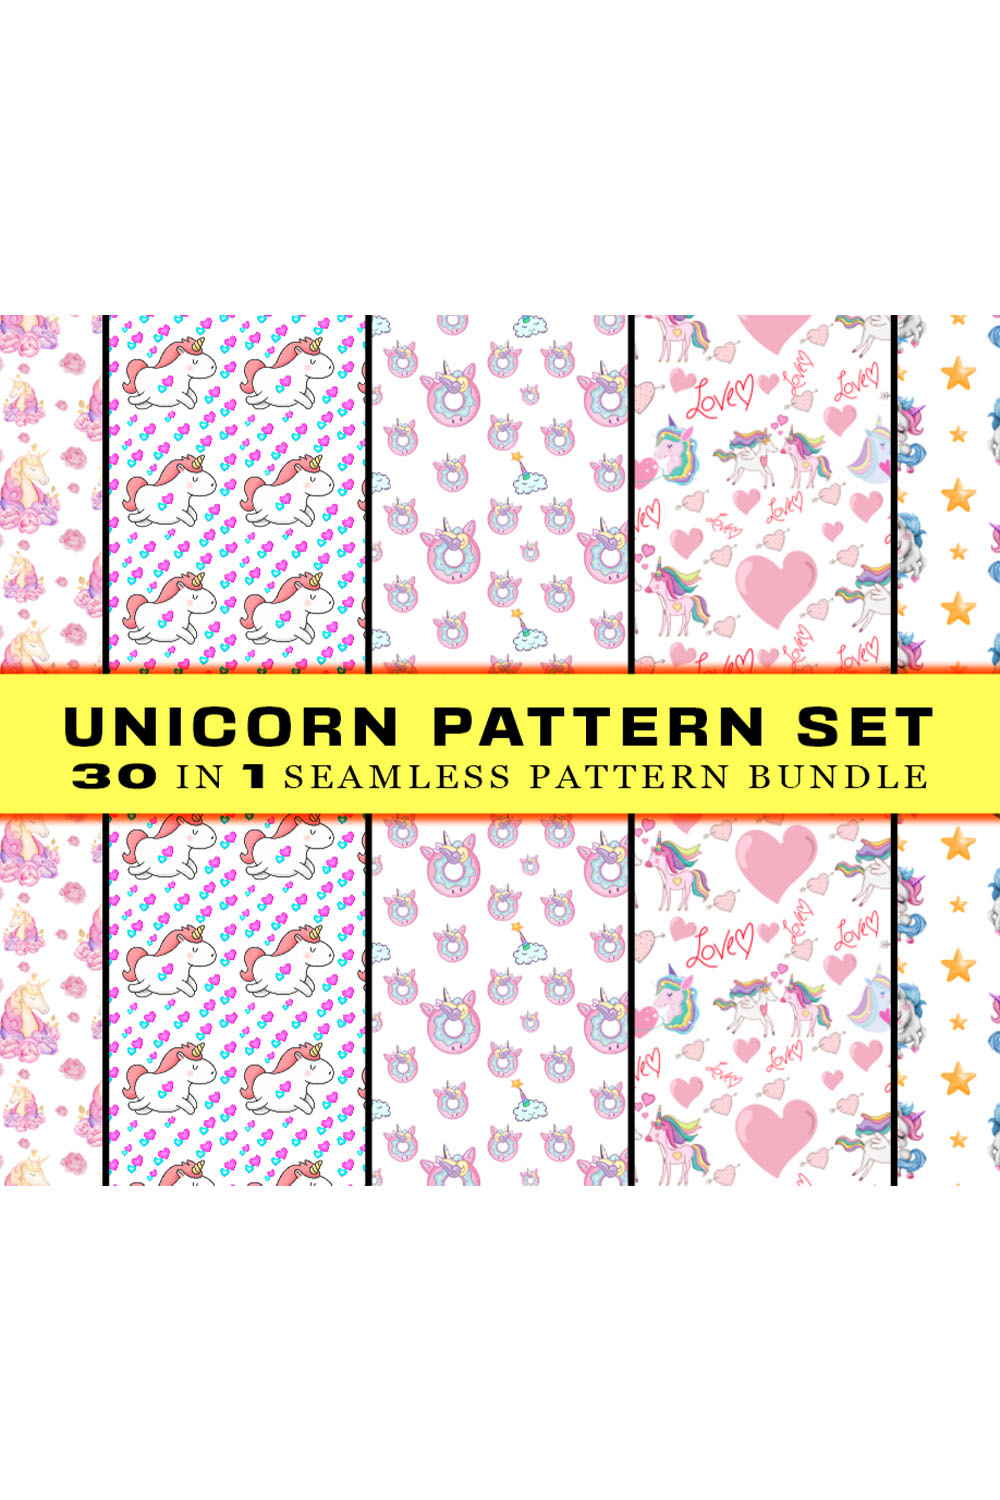 Set of images of irresistible patterns with unicorns